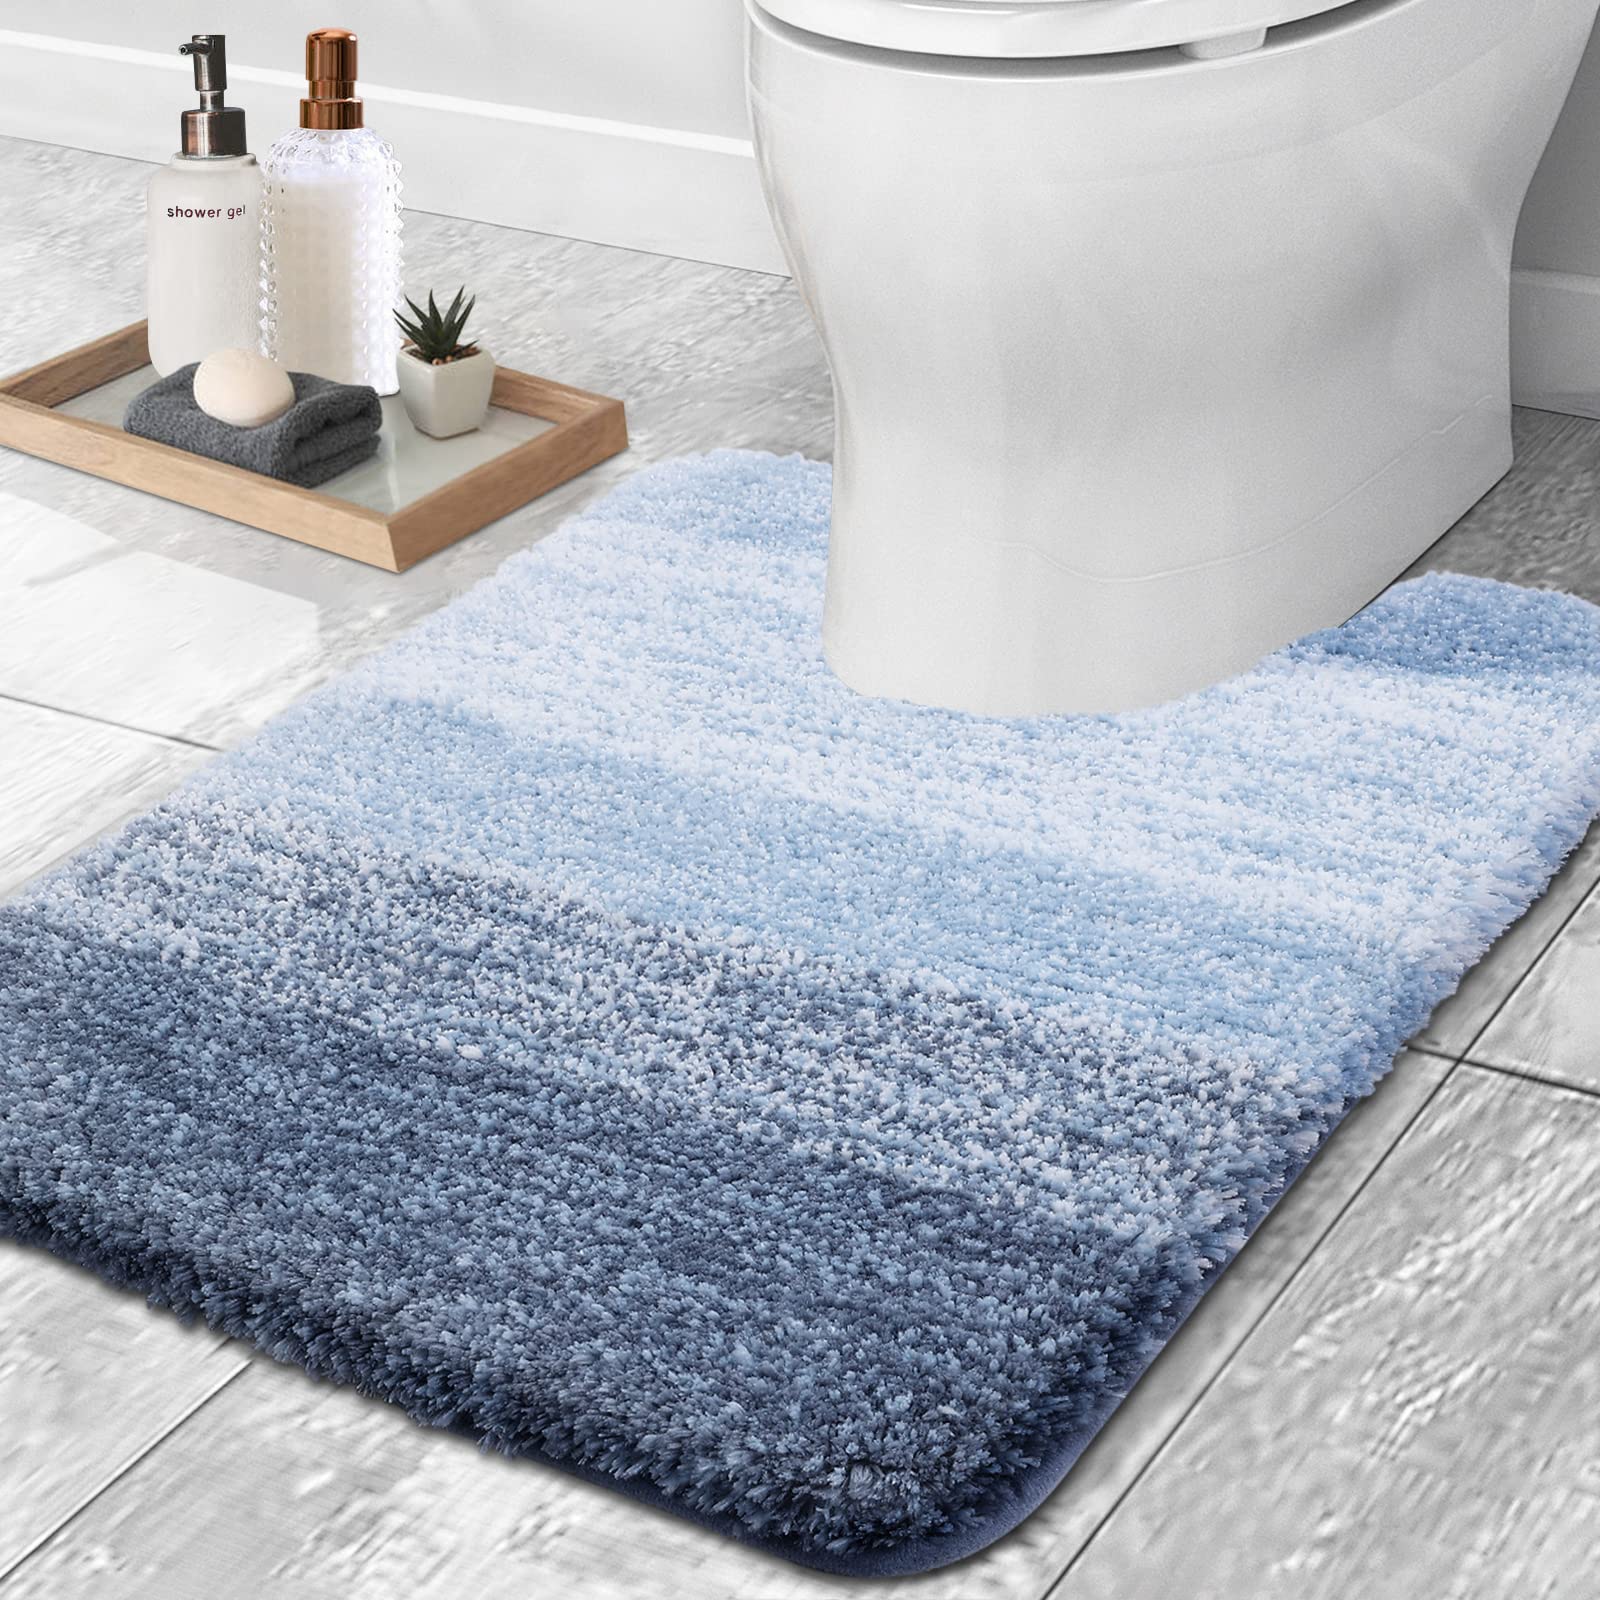 Buganda Luxury U-Shaped Bathroom Rugs, Super Soft and Absorbent Microfiber Toilet Bath Mats, Non-Slip Contour Bathroom Carpets with Rubber Backing, 20X24, Blue - image 1 of 7